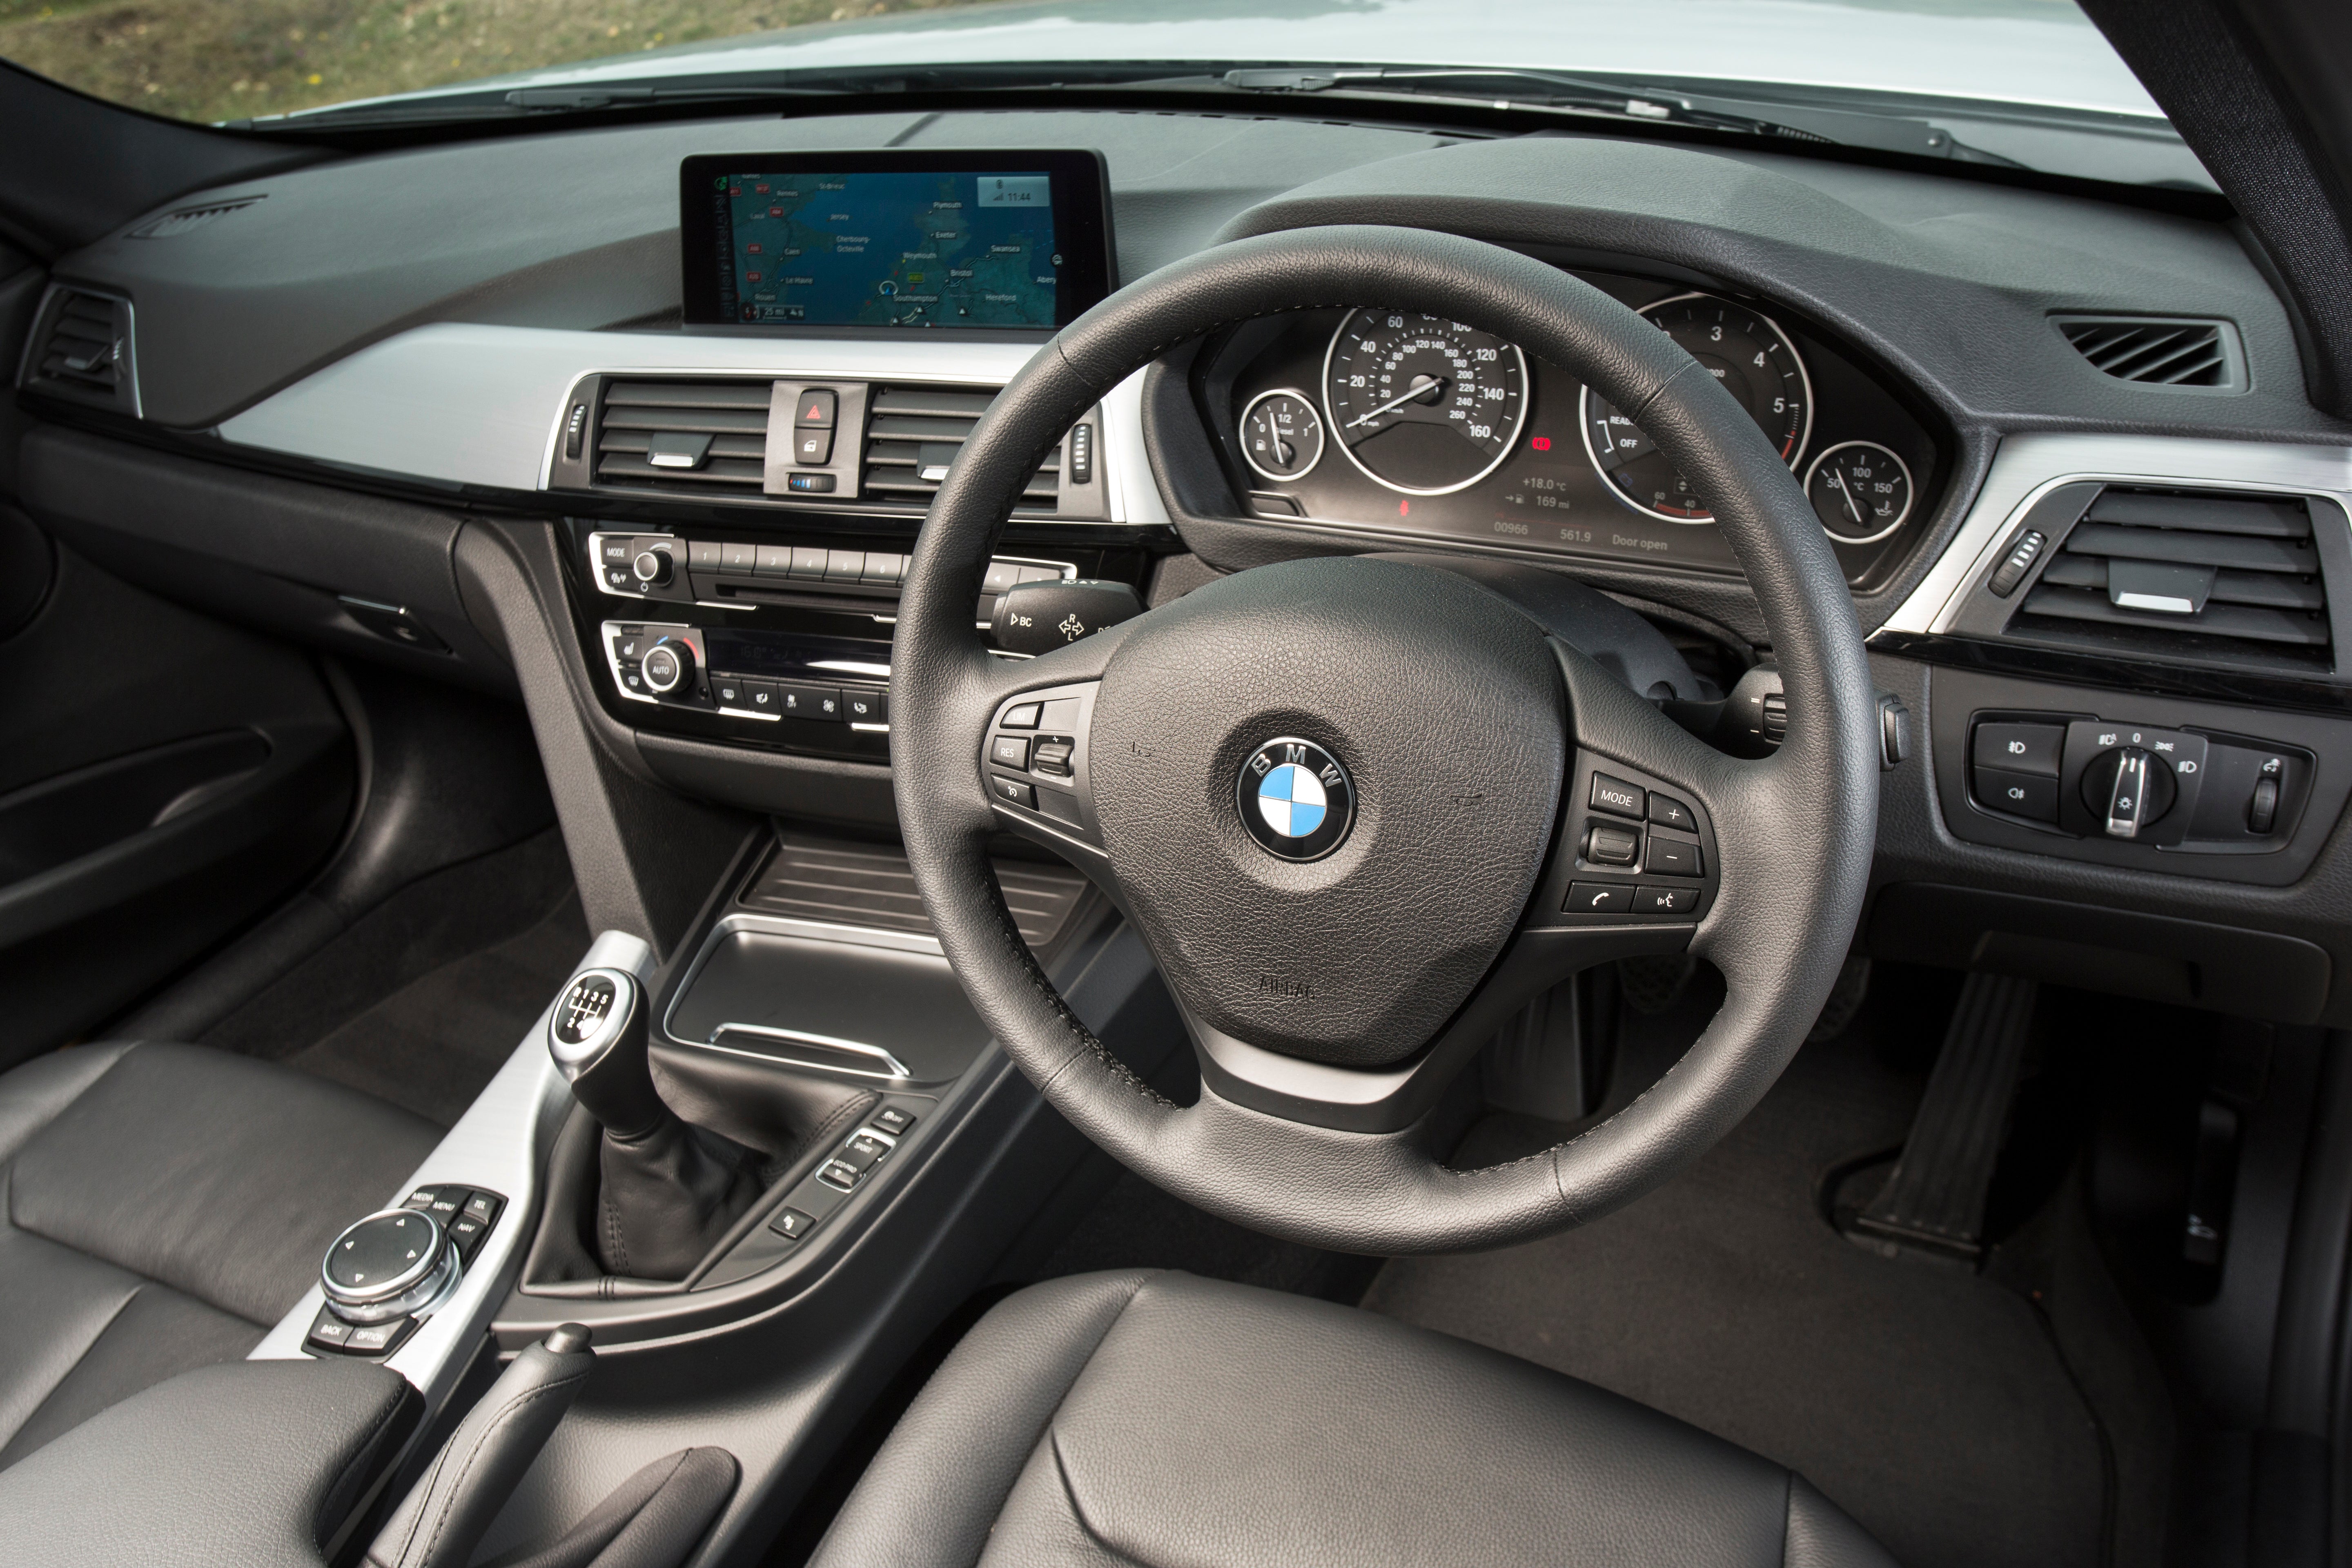 BMW 3 Series (2012-2018) Review: Interior close up photo of the BMW 3 Series dashboard